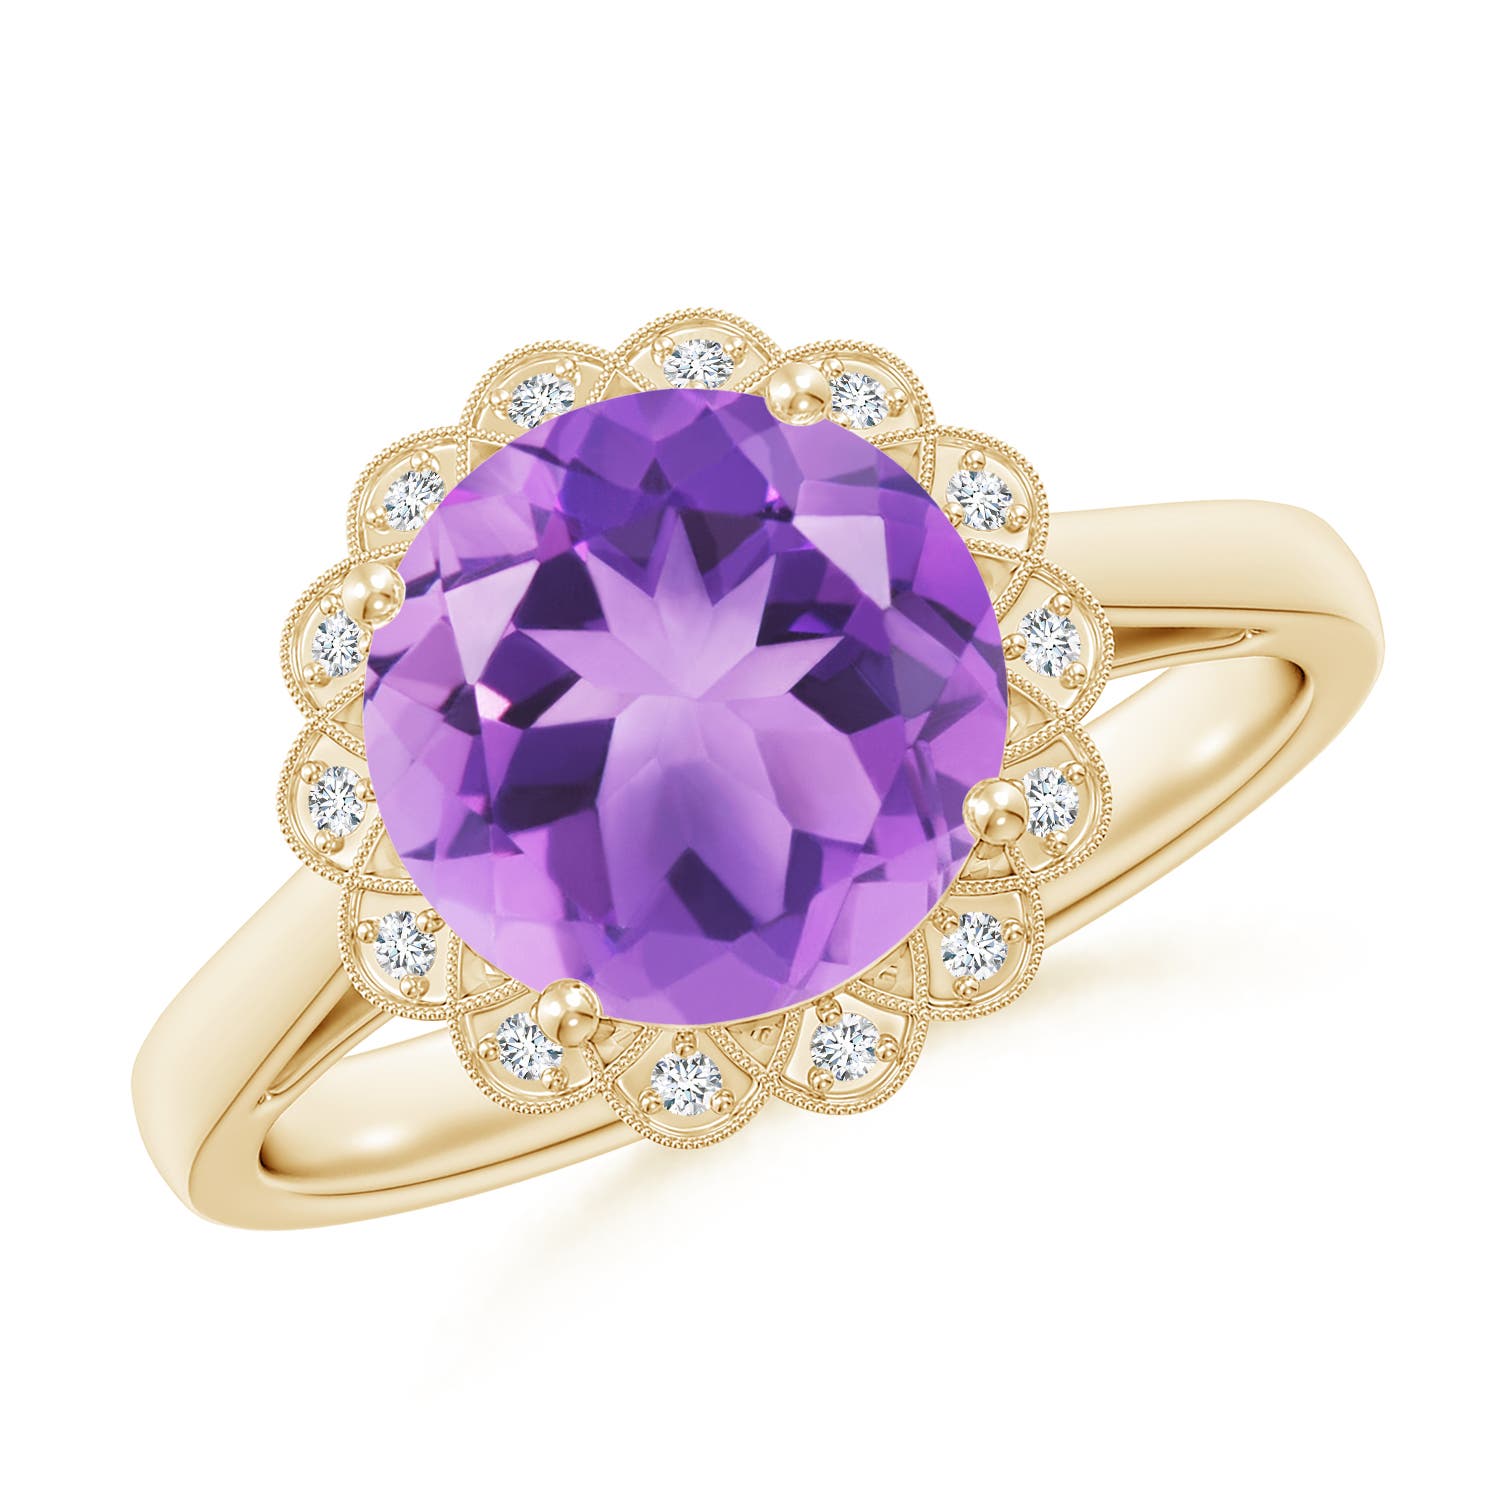 A - Amethyst / 2.52 CT / 14 KT Yellow Gold